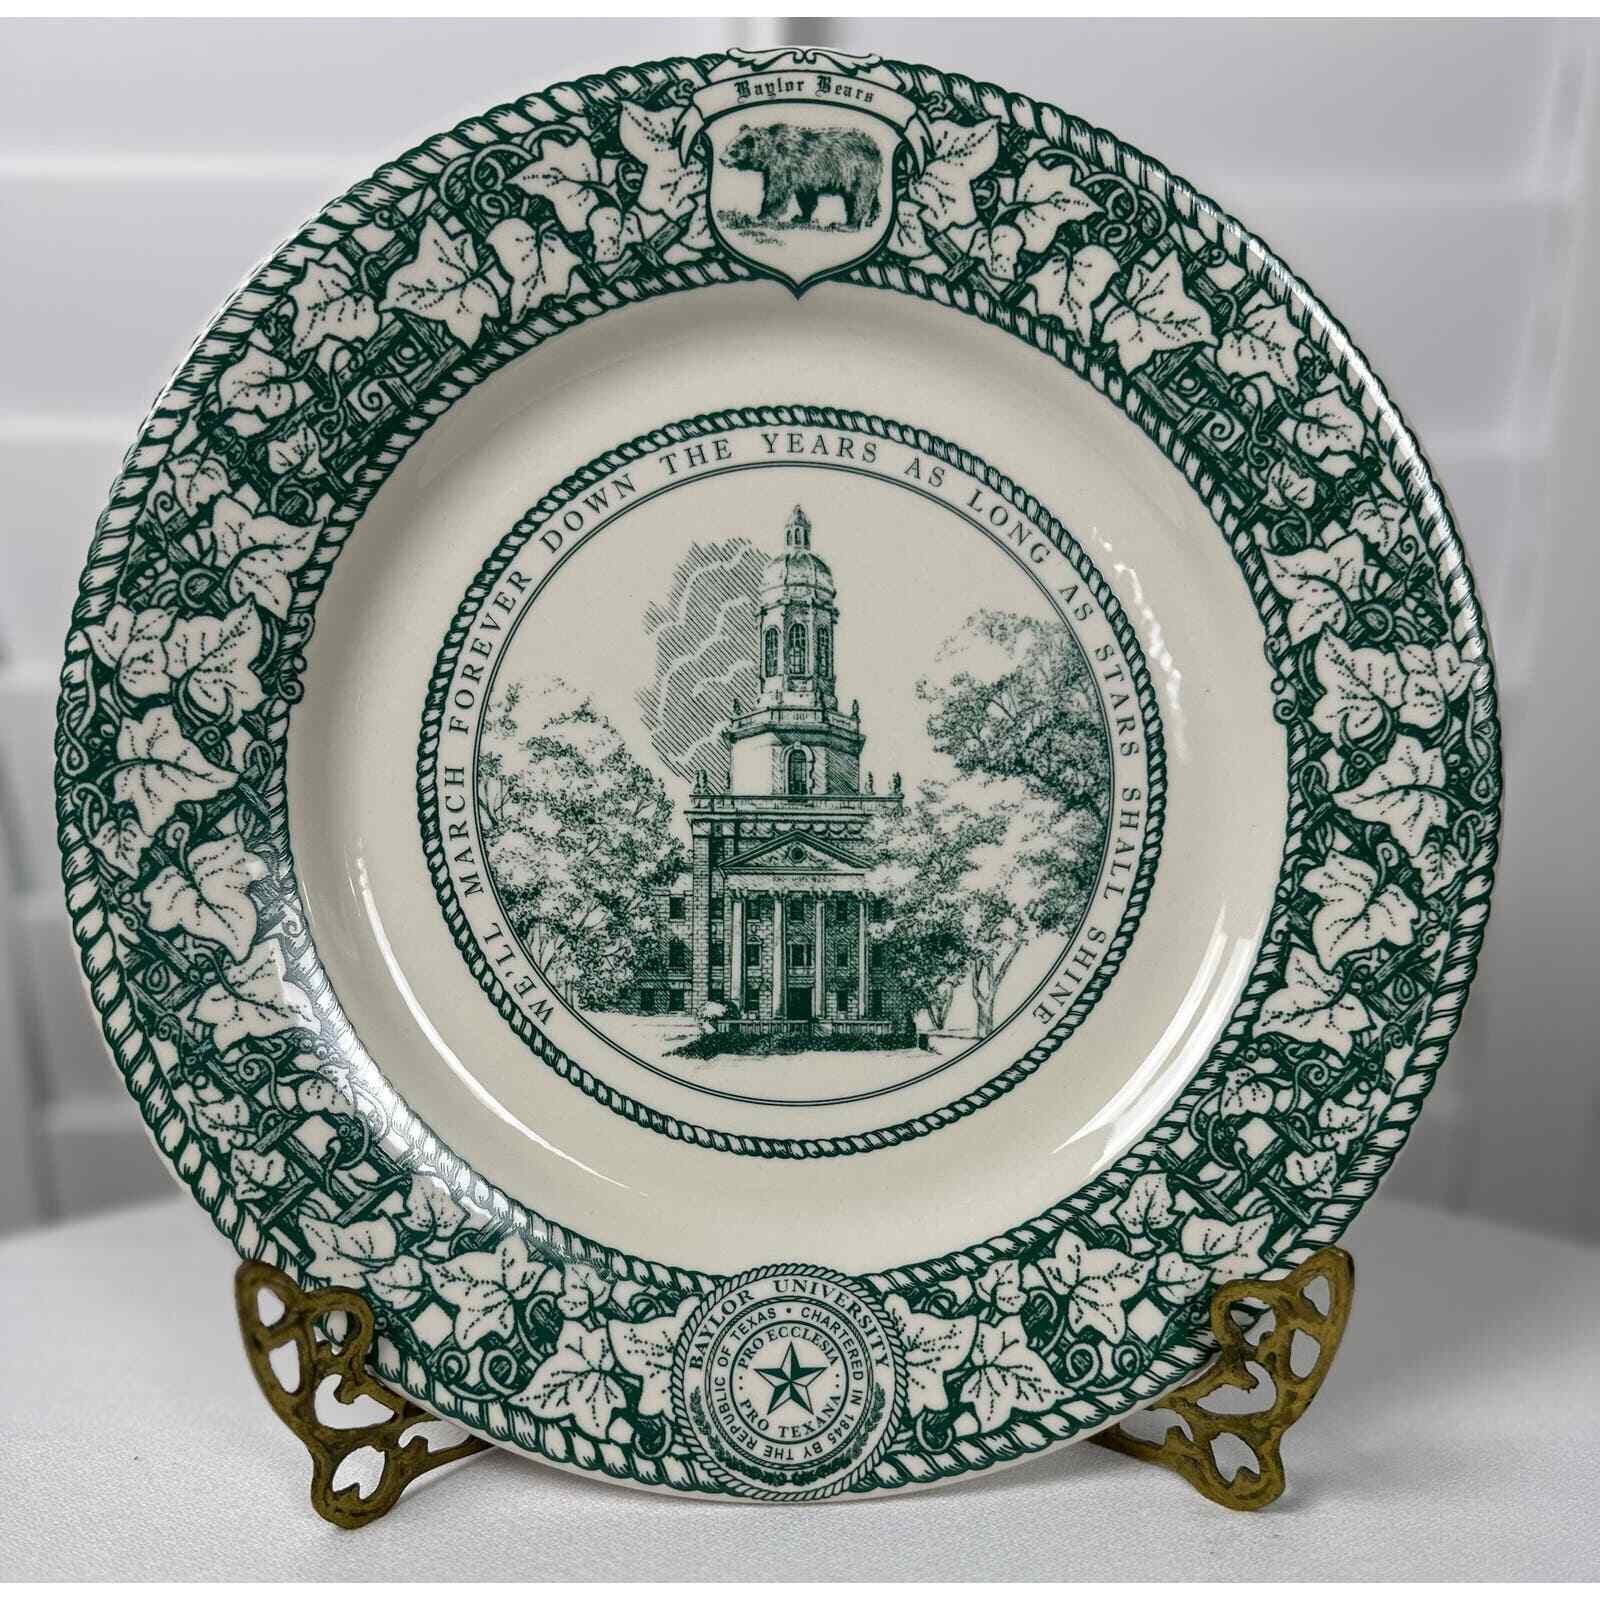 Collegiate Collection by Lynn Medford Baylor University Pat Neff Hall Plate 2006